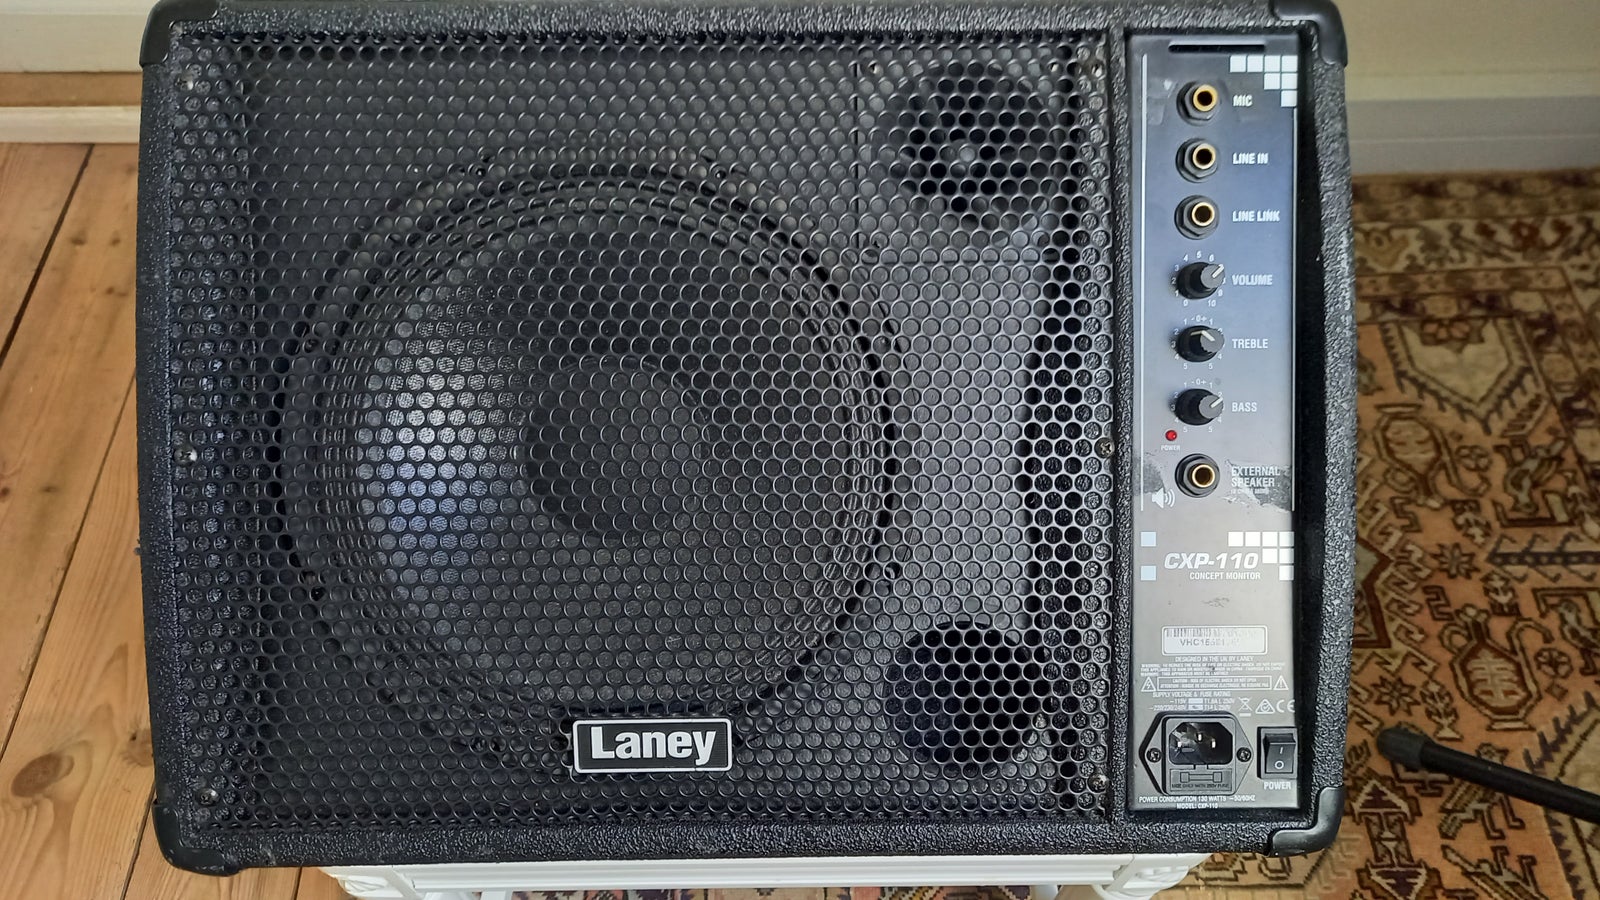 Guitarcombo, LANEY CPX110 concept monitor, 130 W